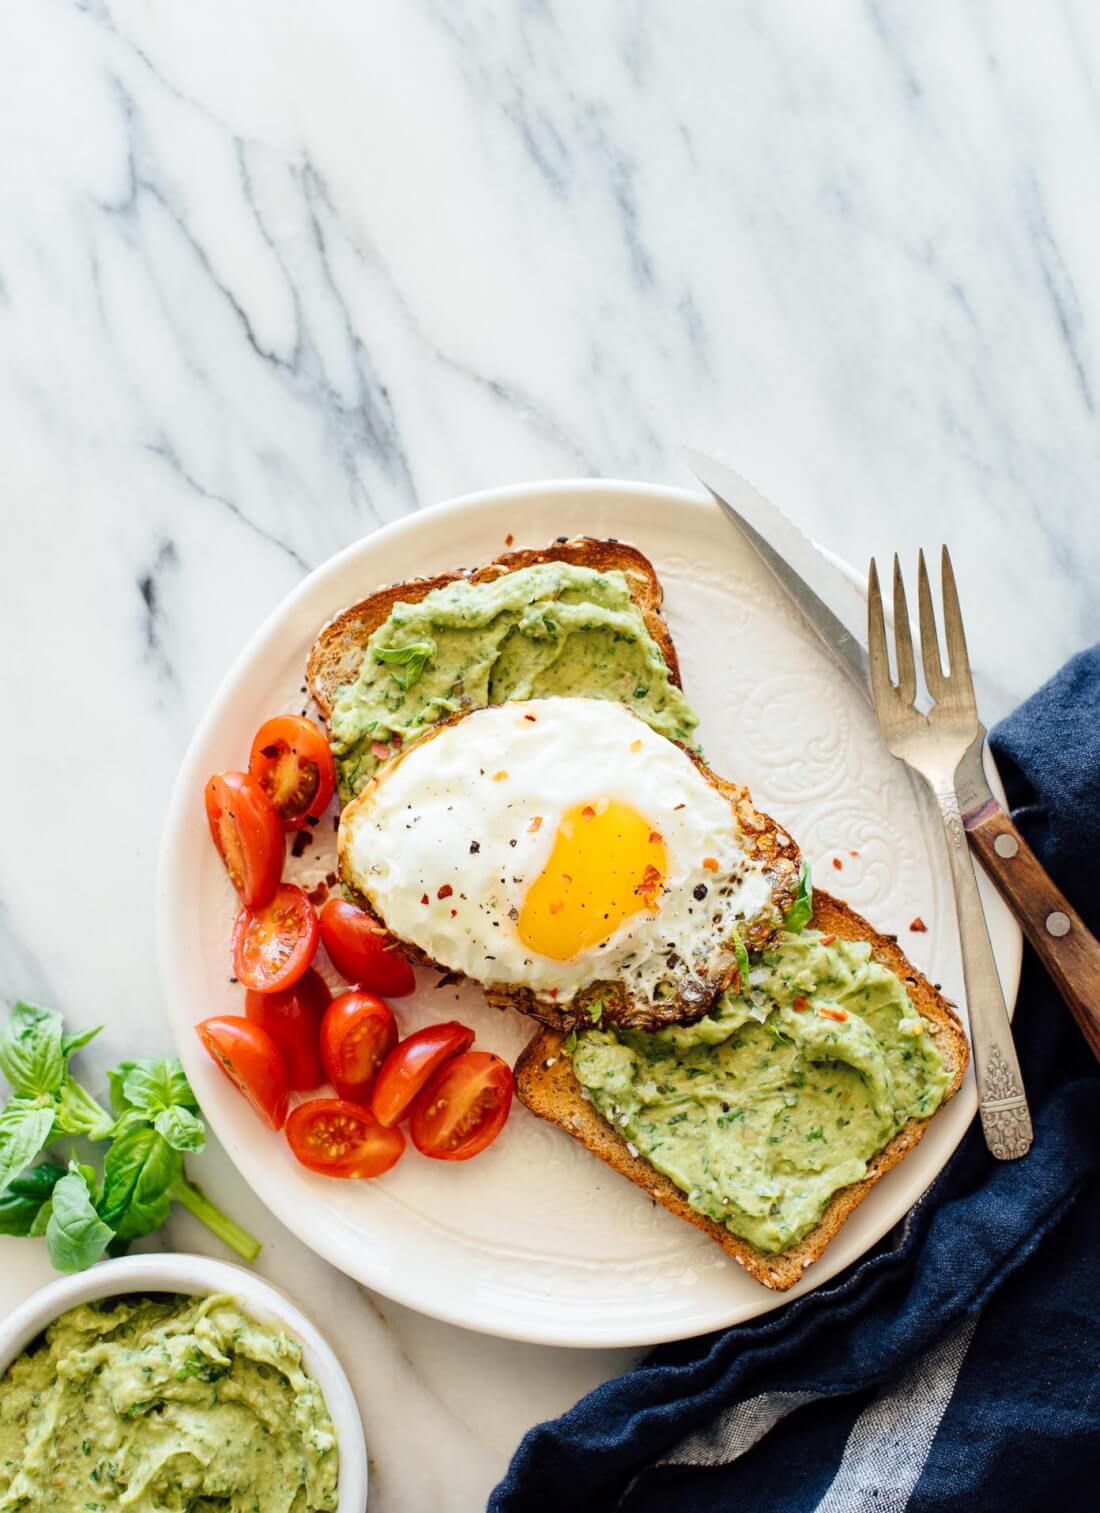 Love avocados and wondering how to make avocado toast either you like them smashed or for breakfast mornings, lunch, or as healthy snacks sandwiches. Here is an article with 15 best simple, avocado toast ideas some have eggs, others are vegan, clean eating, different varieties of toppings to add example salmon. My favorite is # 5. Avocado toast Photography #avocadotoast #toast #avocado #food #lunch #dinner #breakfastideas 